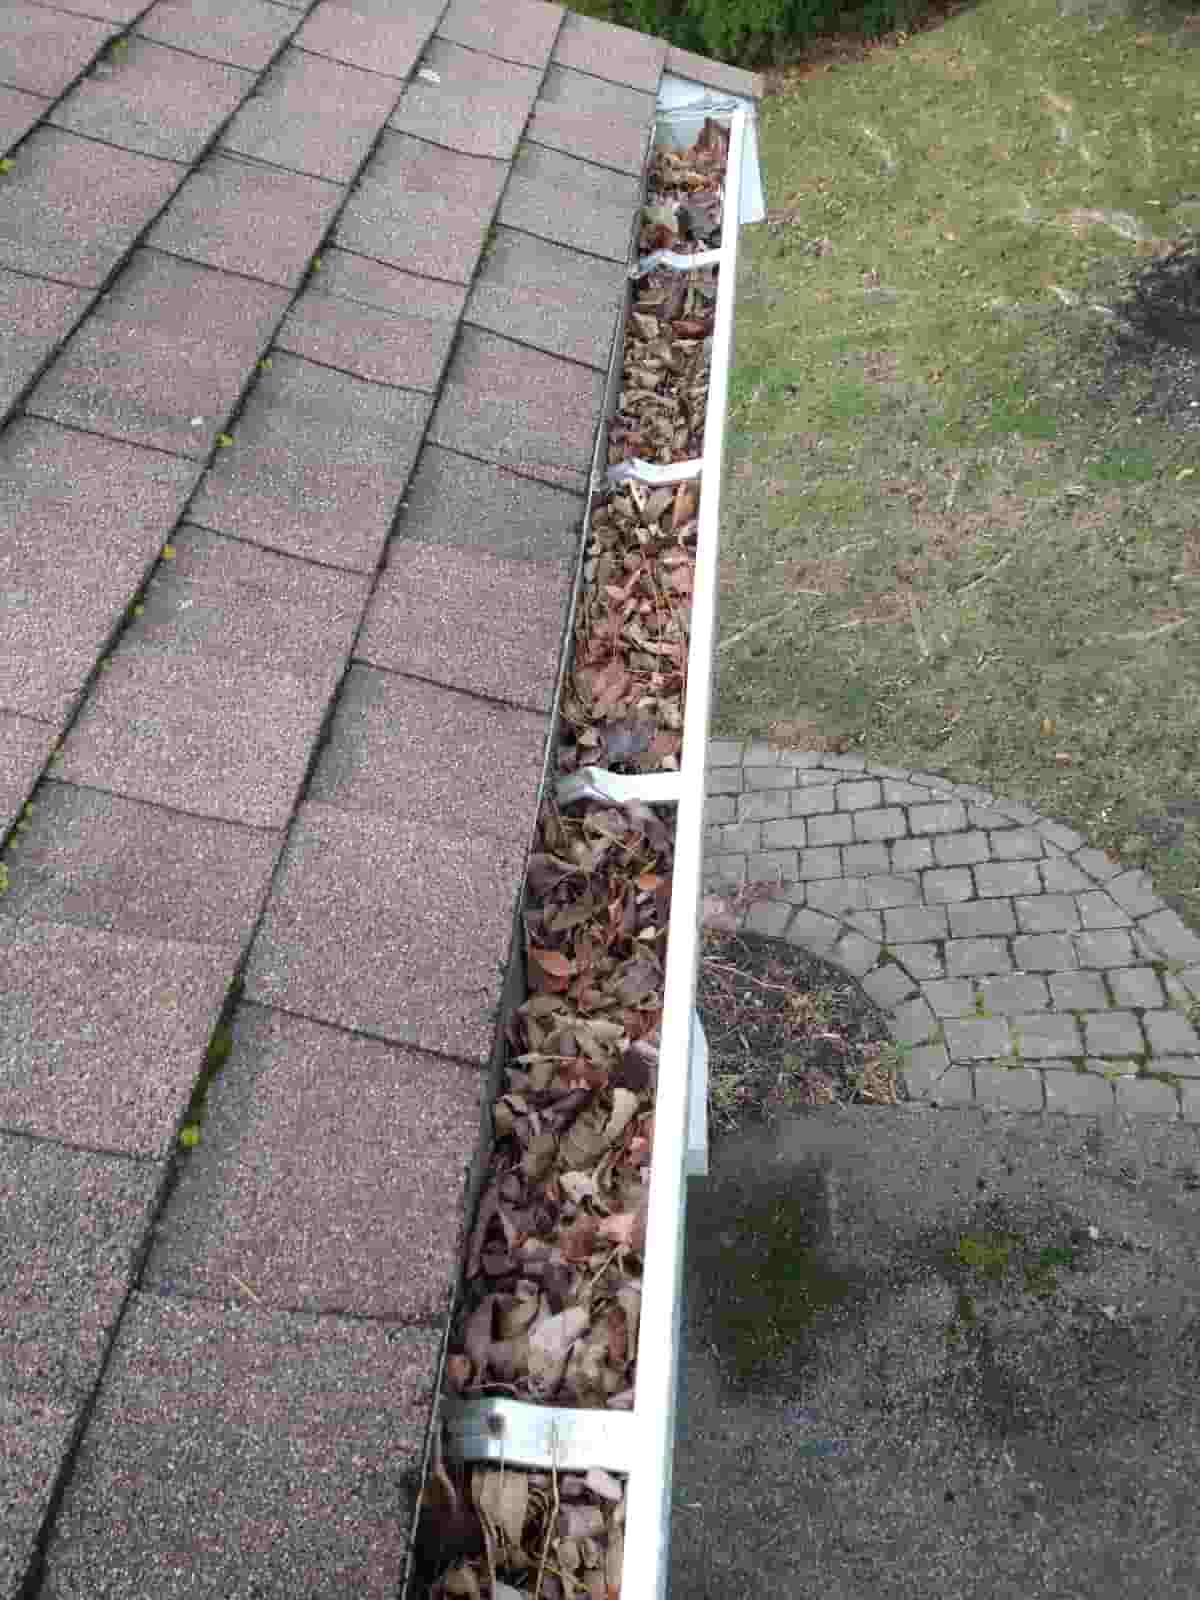 gutter cleaning florida